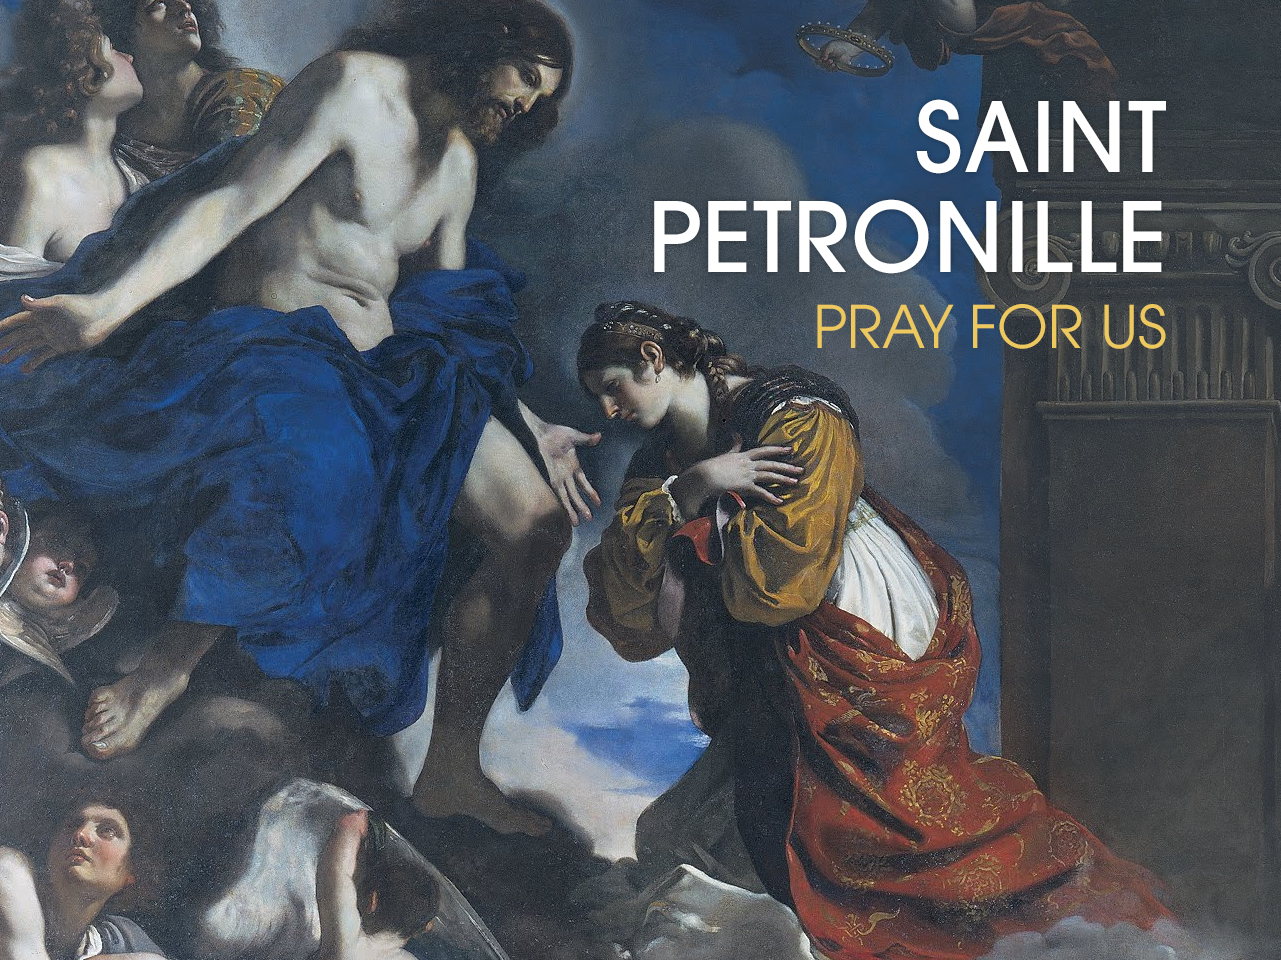 St. Petronille